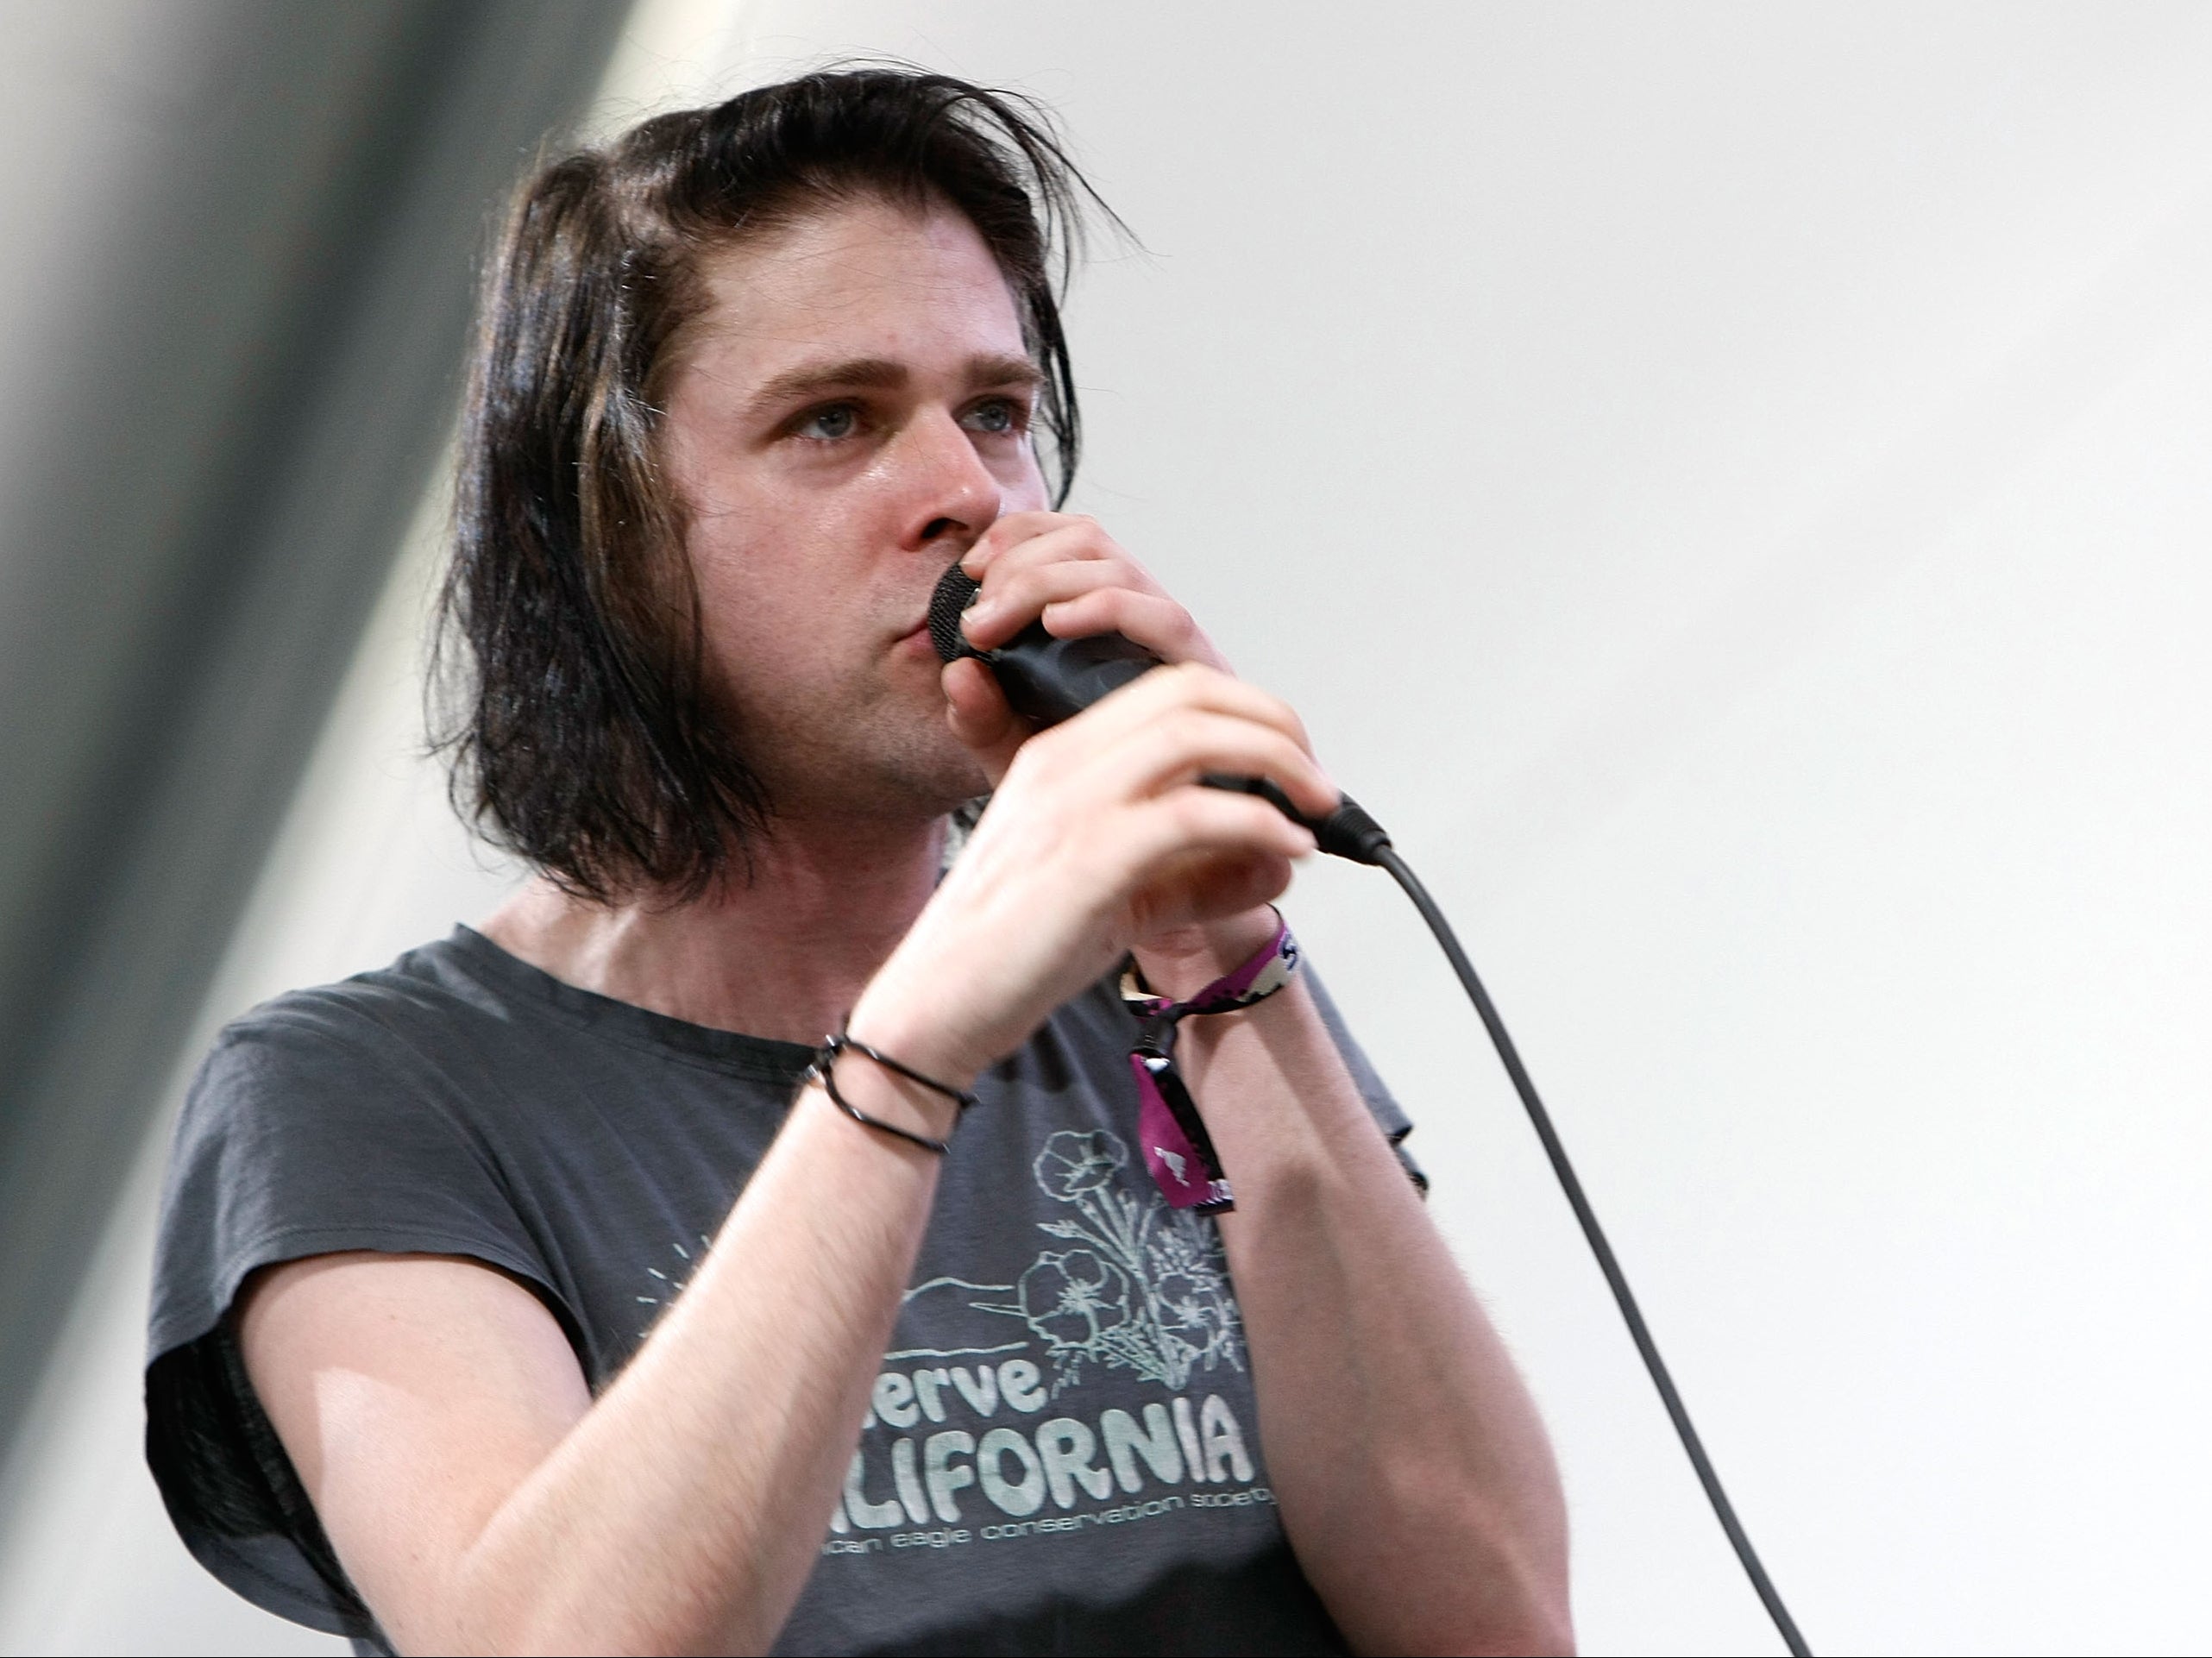 Ariel Pink drops out of record label after attending pro-Trump rally